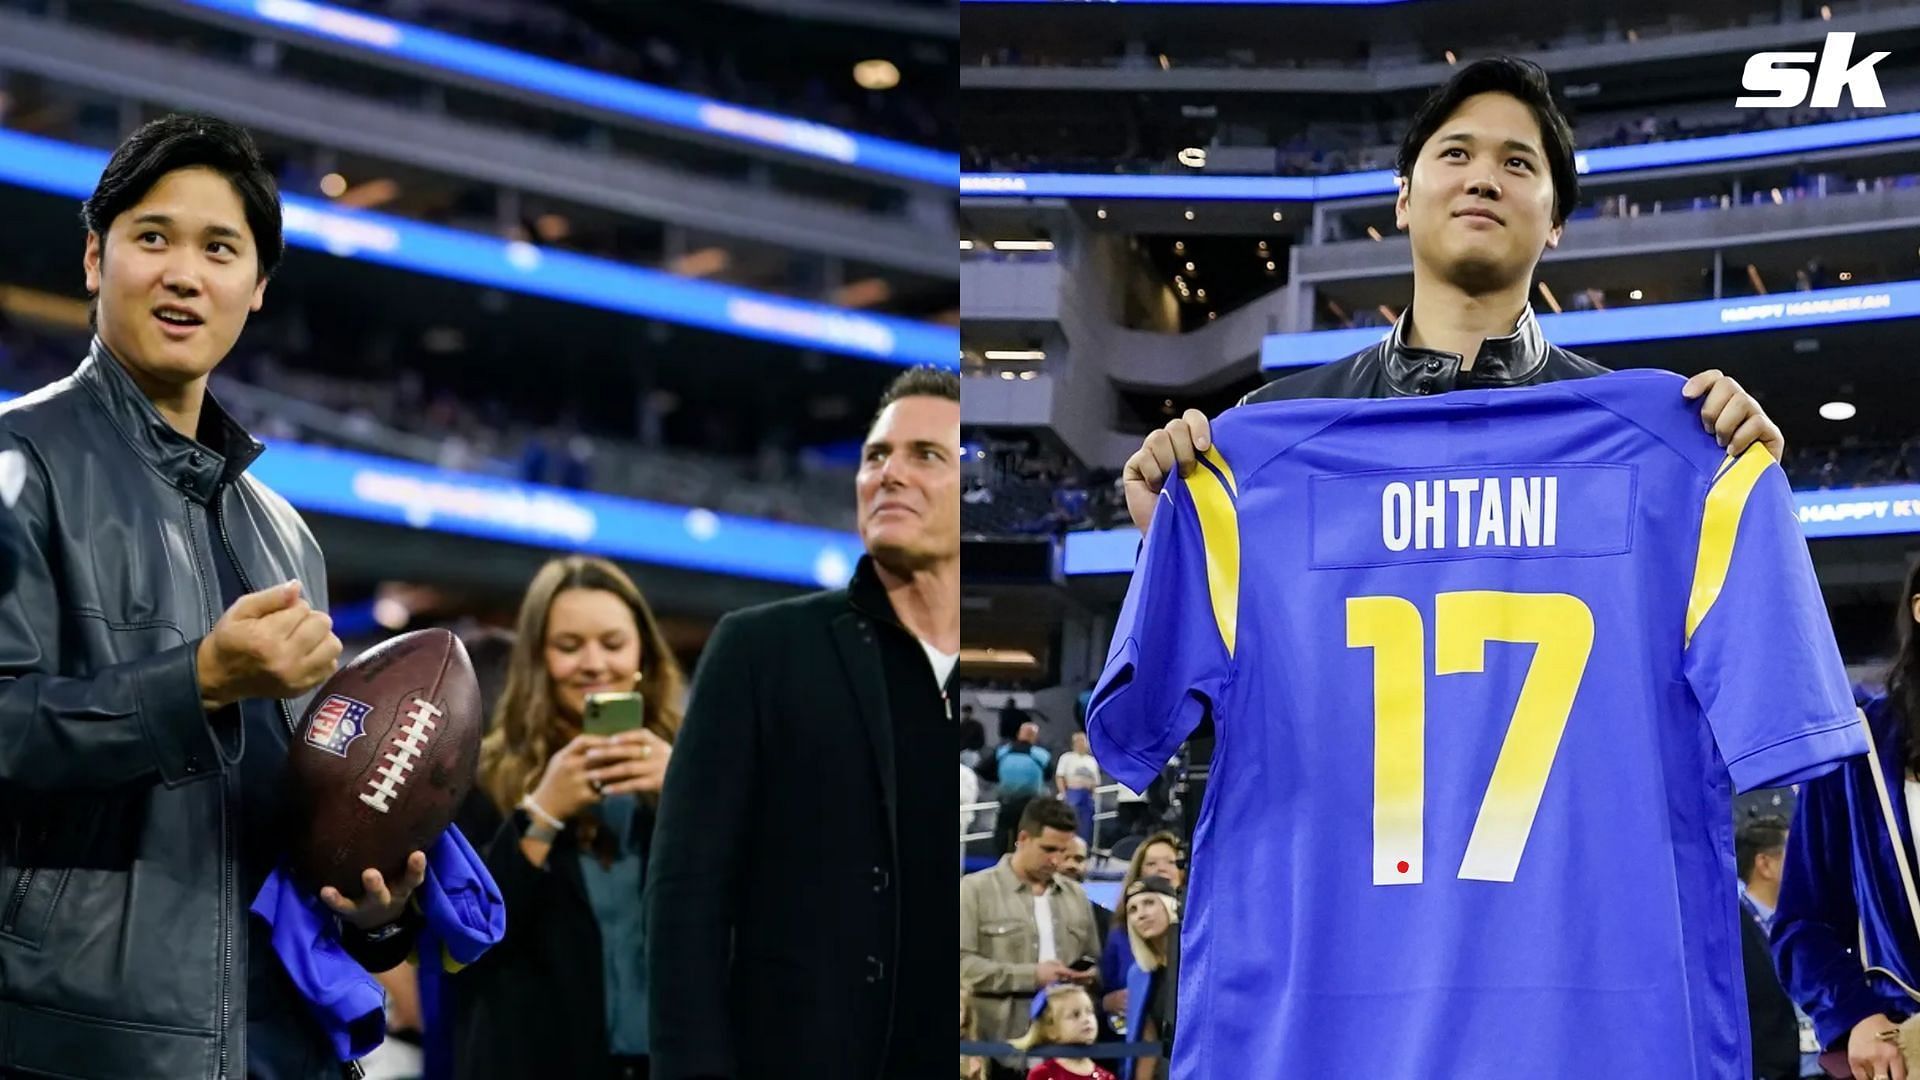 Ohtani showing off his very own Los Angeles Rams jersey